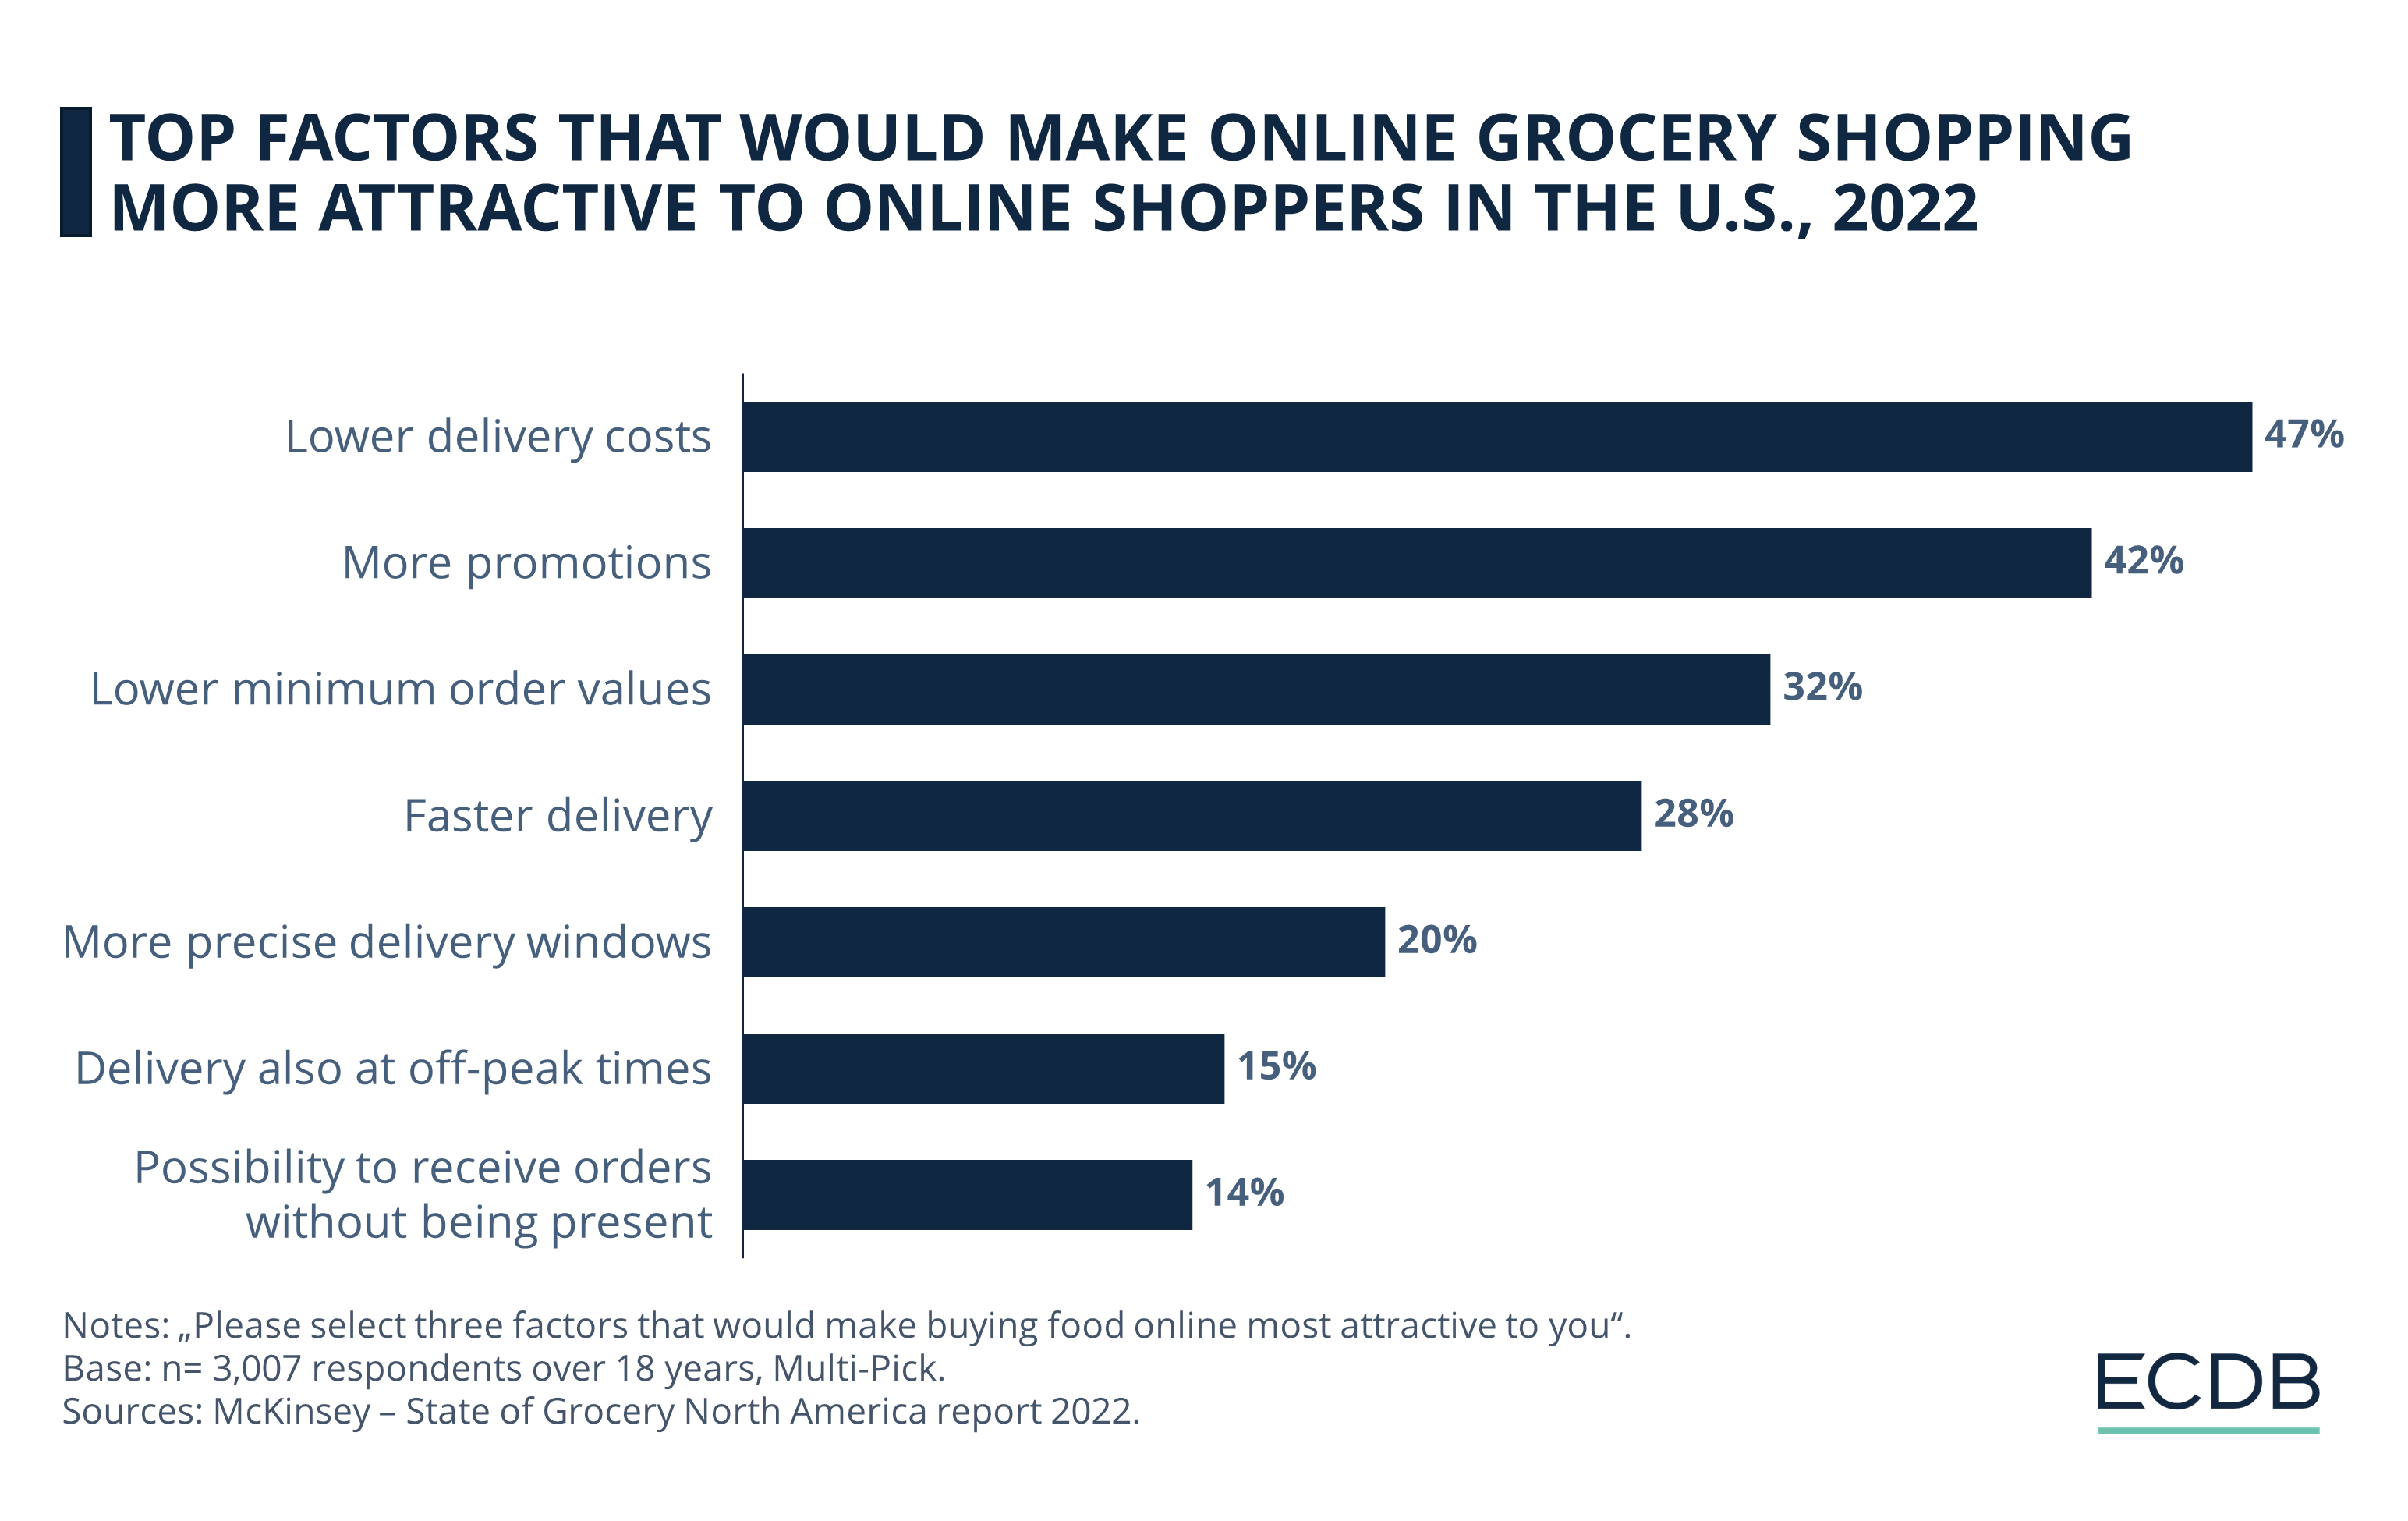 Top Factors That Would Make Online Grocery Shopping More Attractive to Online Shoppers in the U.S., 2022